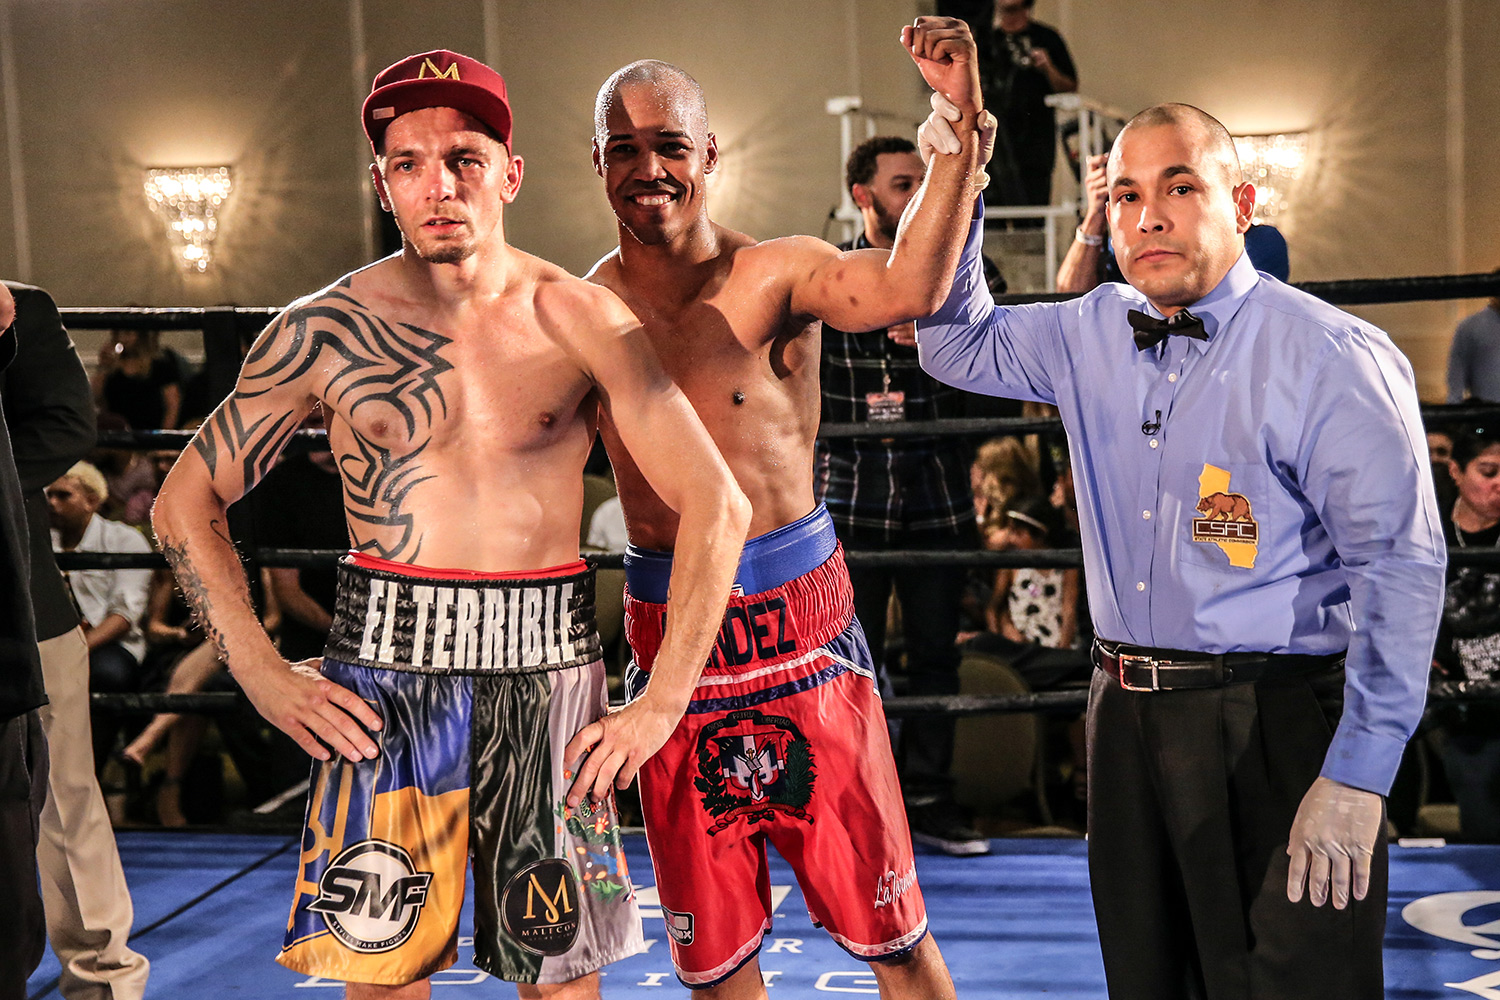 Mendez outpoints Redkach, who blames ref's calls for the loss - The Ring